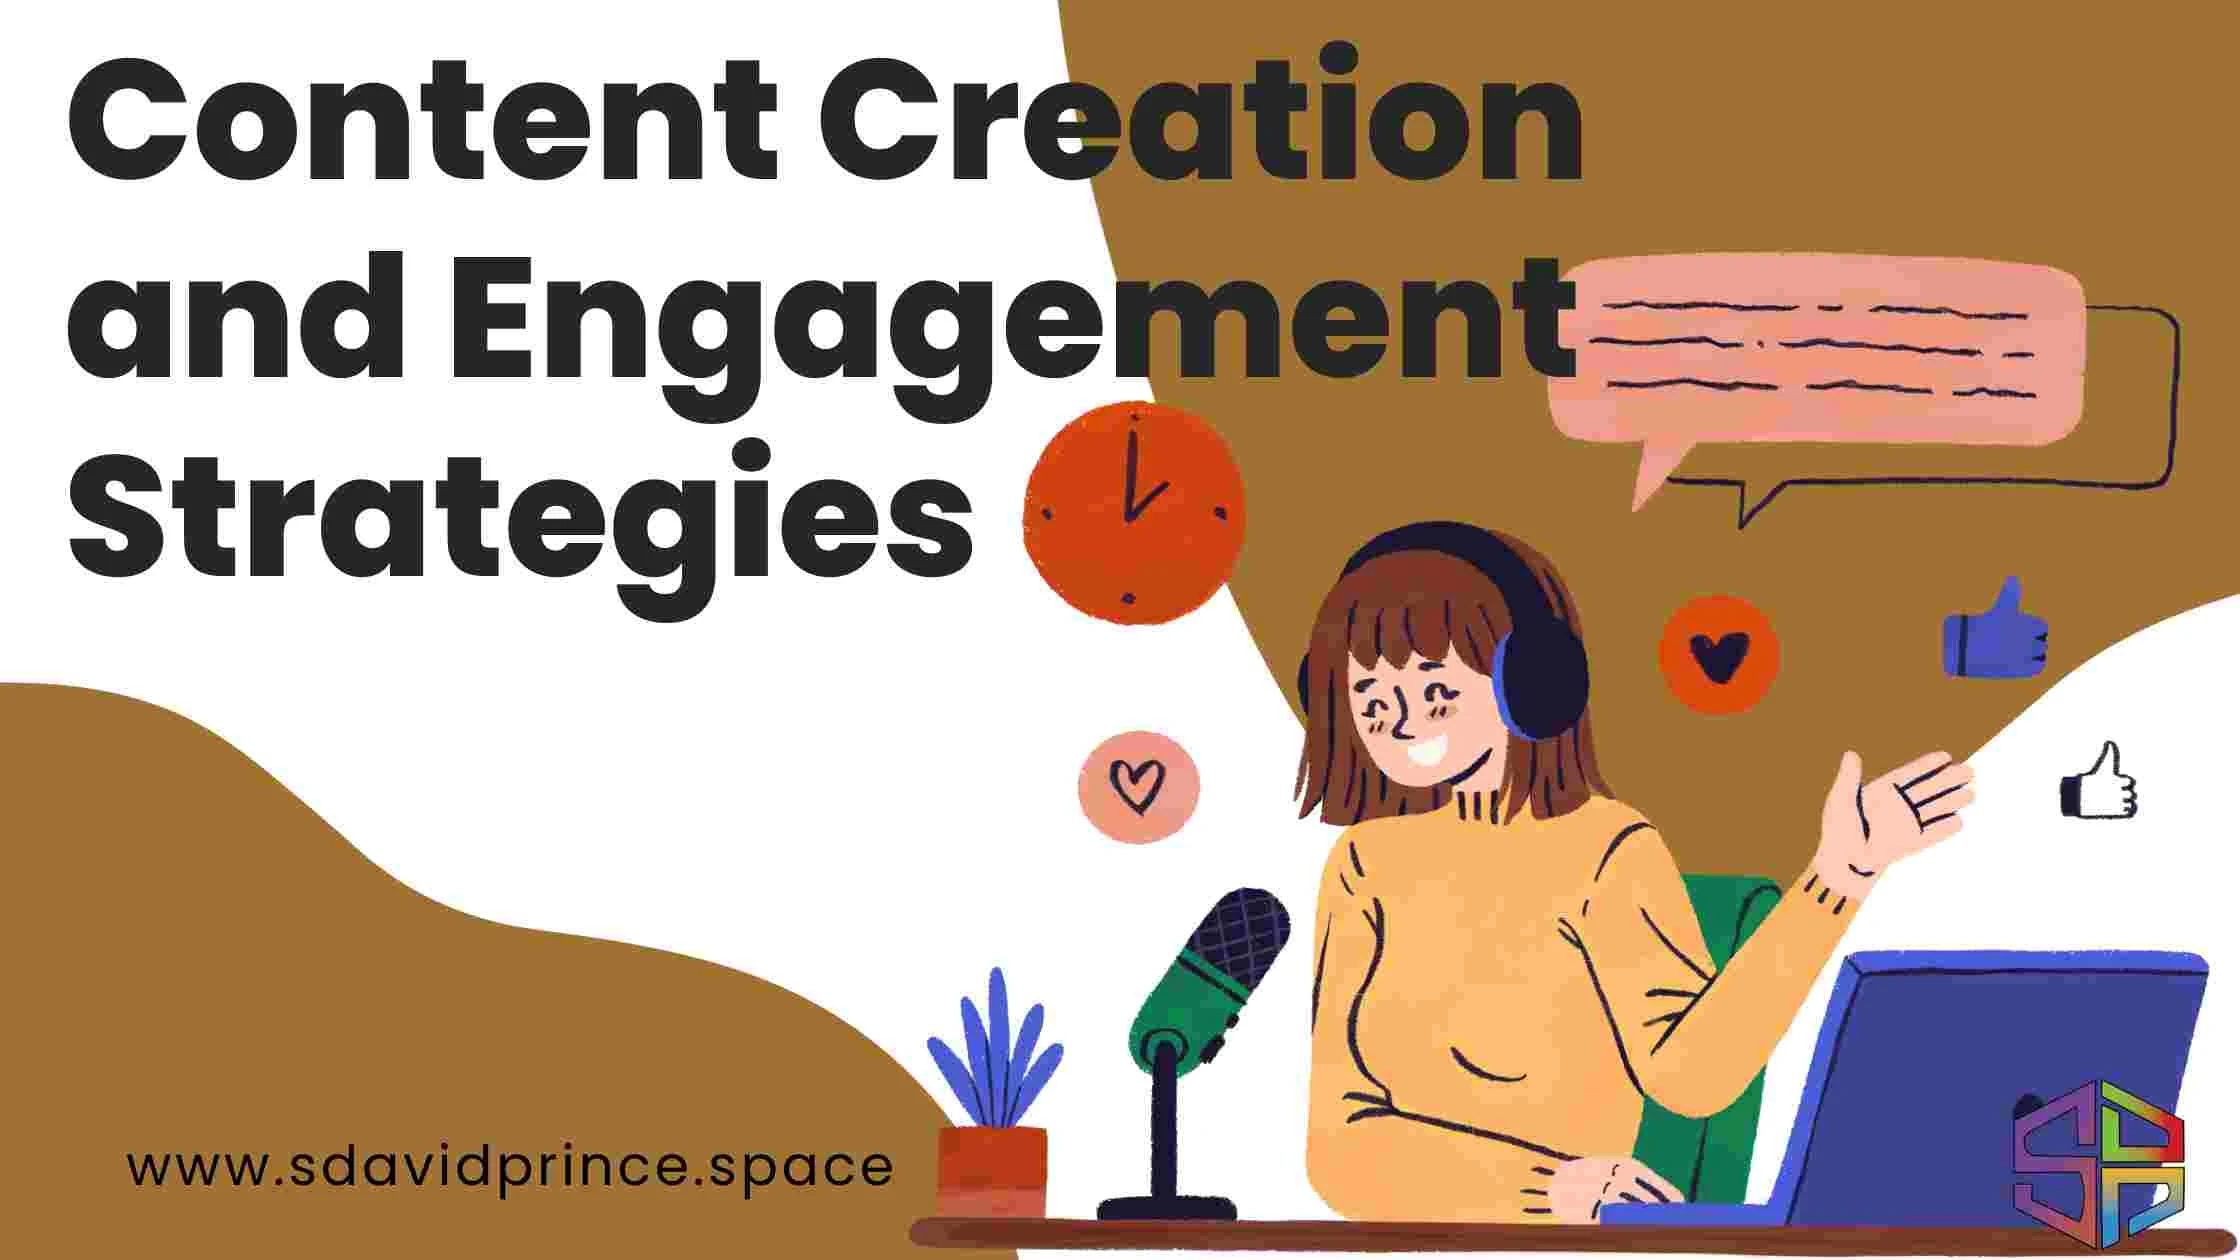 Content Creation and Engagement Strategies